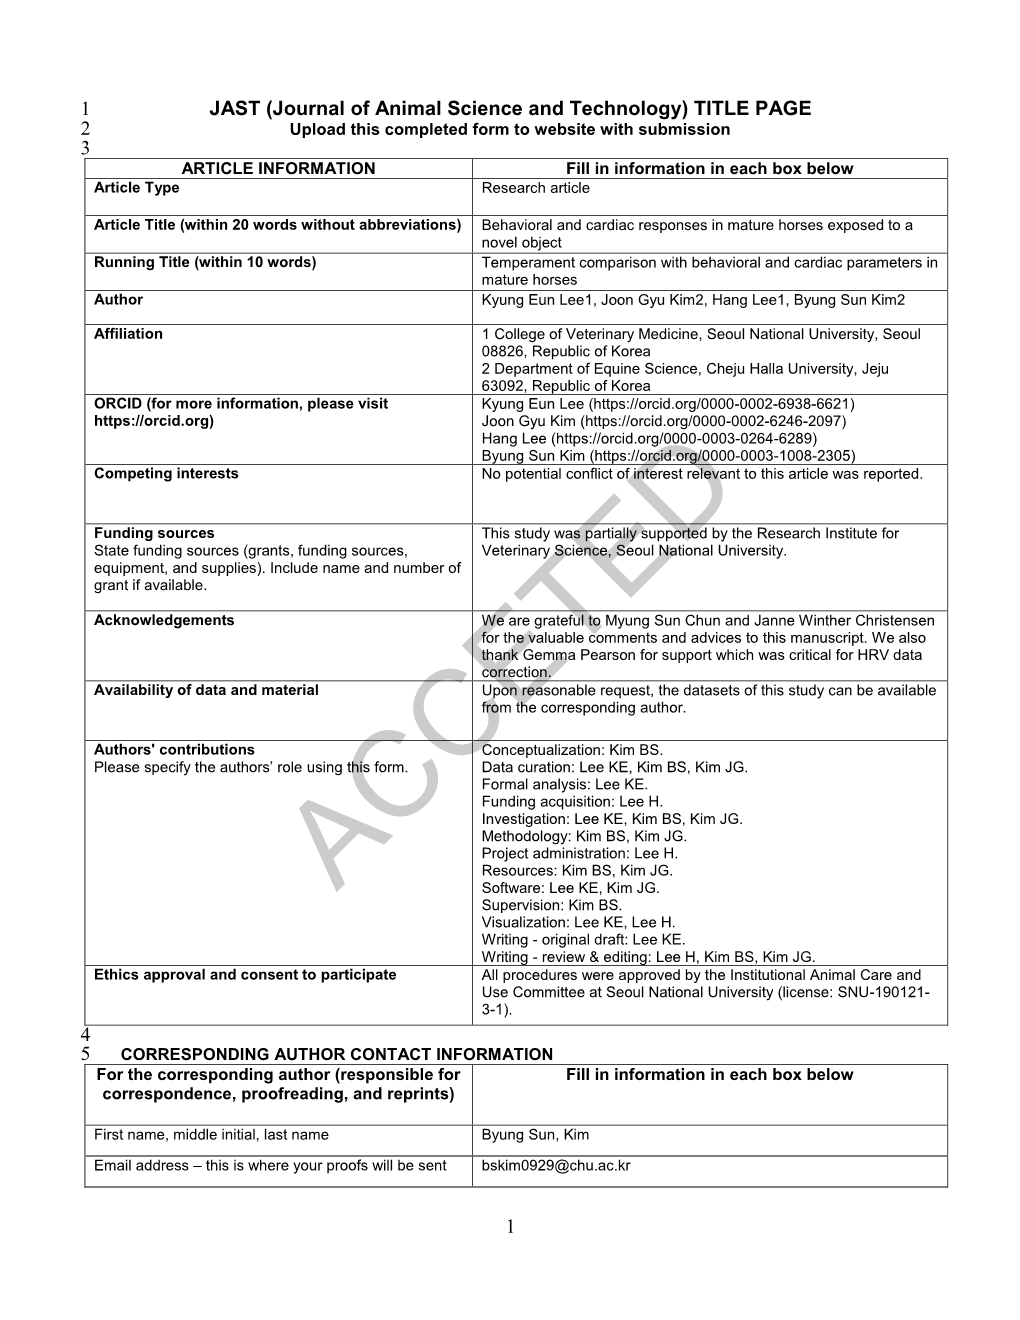 TITLE PAGE 2 Upload This Completed Form to Website with Submission 3 ARTICLE INFORMATION Fill in Information in Each Box Below Article Type Research Article